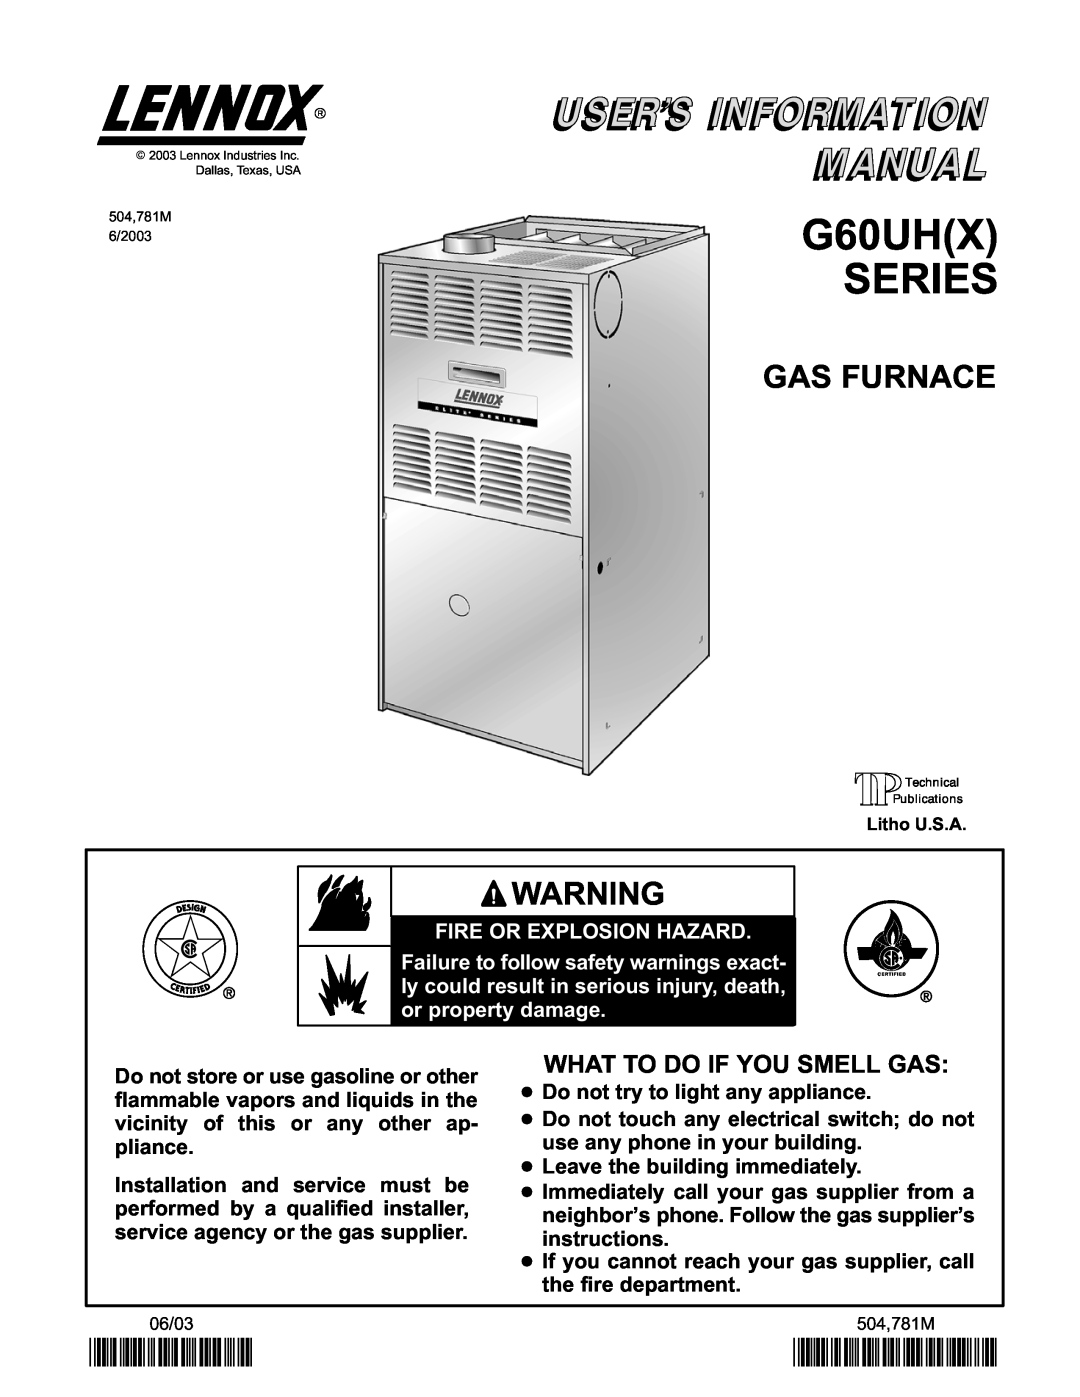 Lennox International Inc G60UH(X) Series manual G60UHX SERIES, Gas Furnace, 2P0603, P504781M, What To Do If You Smell Gas 